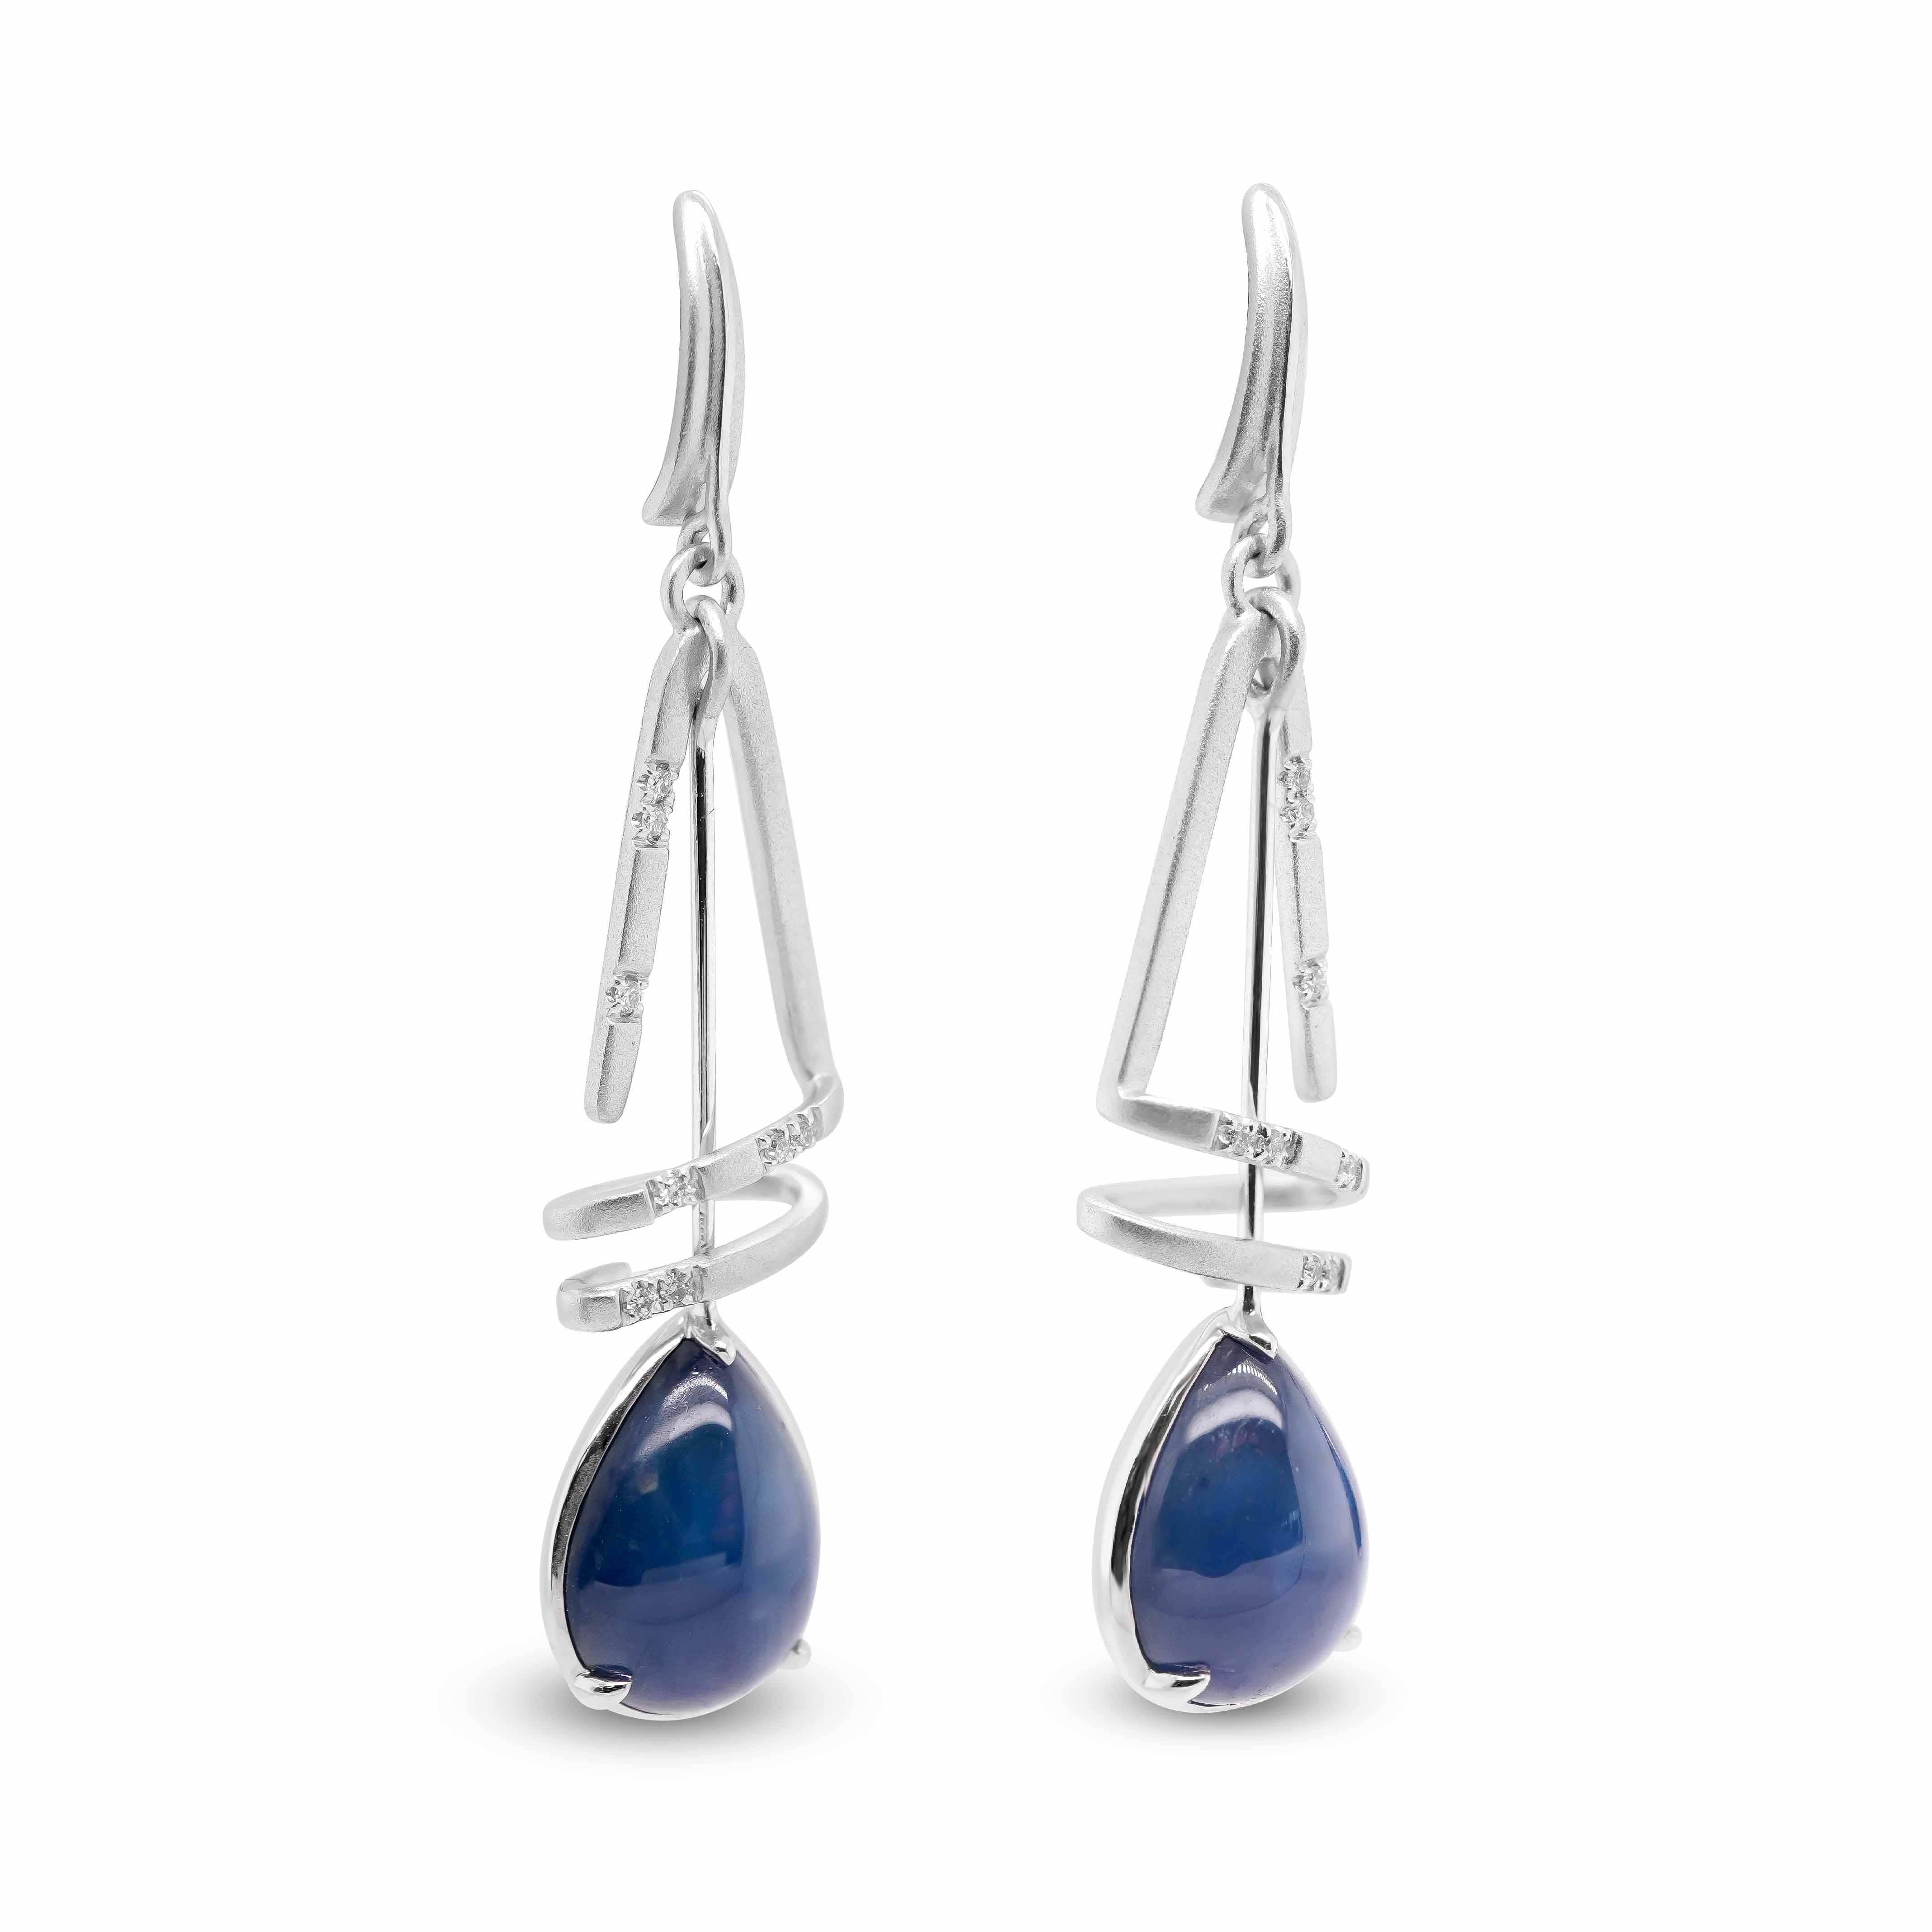  A pair of earrings, each comprising of a pear shaped sapphire weighing 6.74cts suspended by a spiral of 16 white diamonds.
Blue Sapphires are highly sought after gems today. Their stunning array of blues have captured the attention of many, over